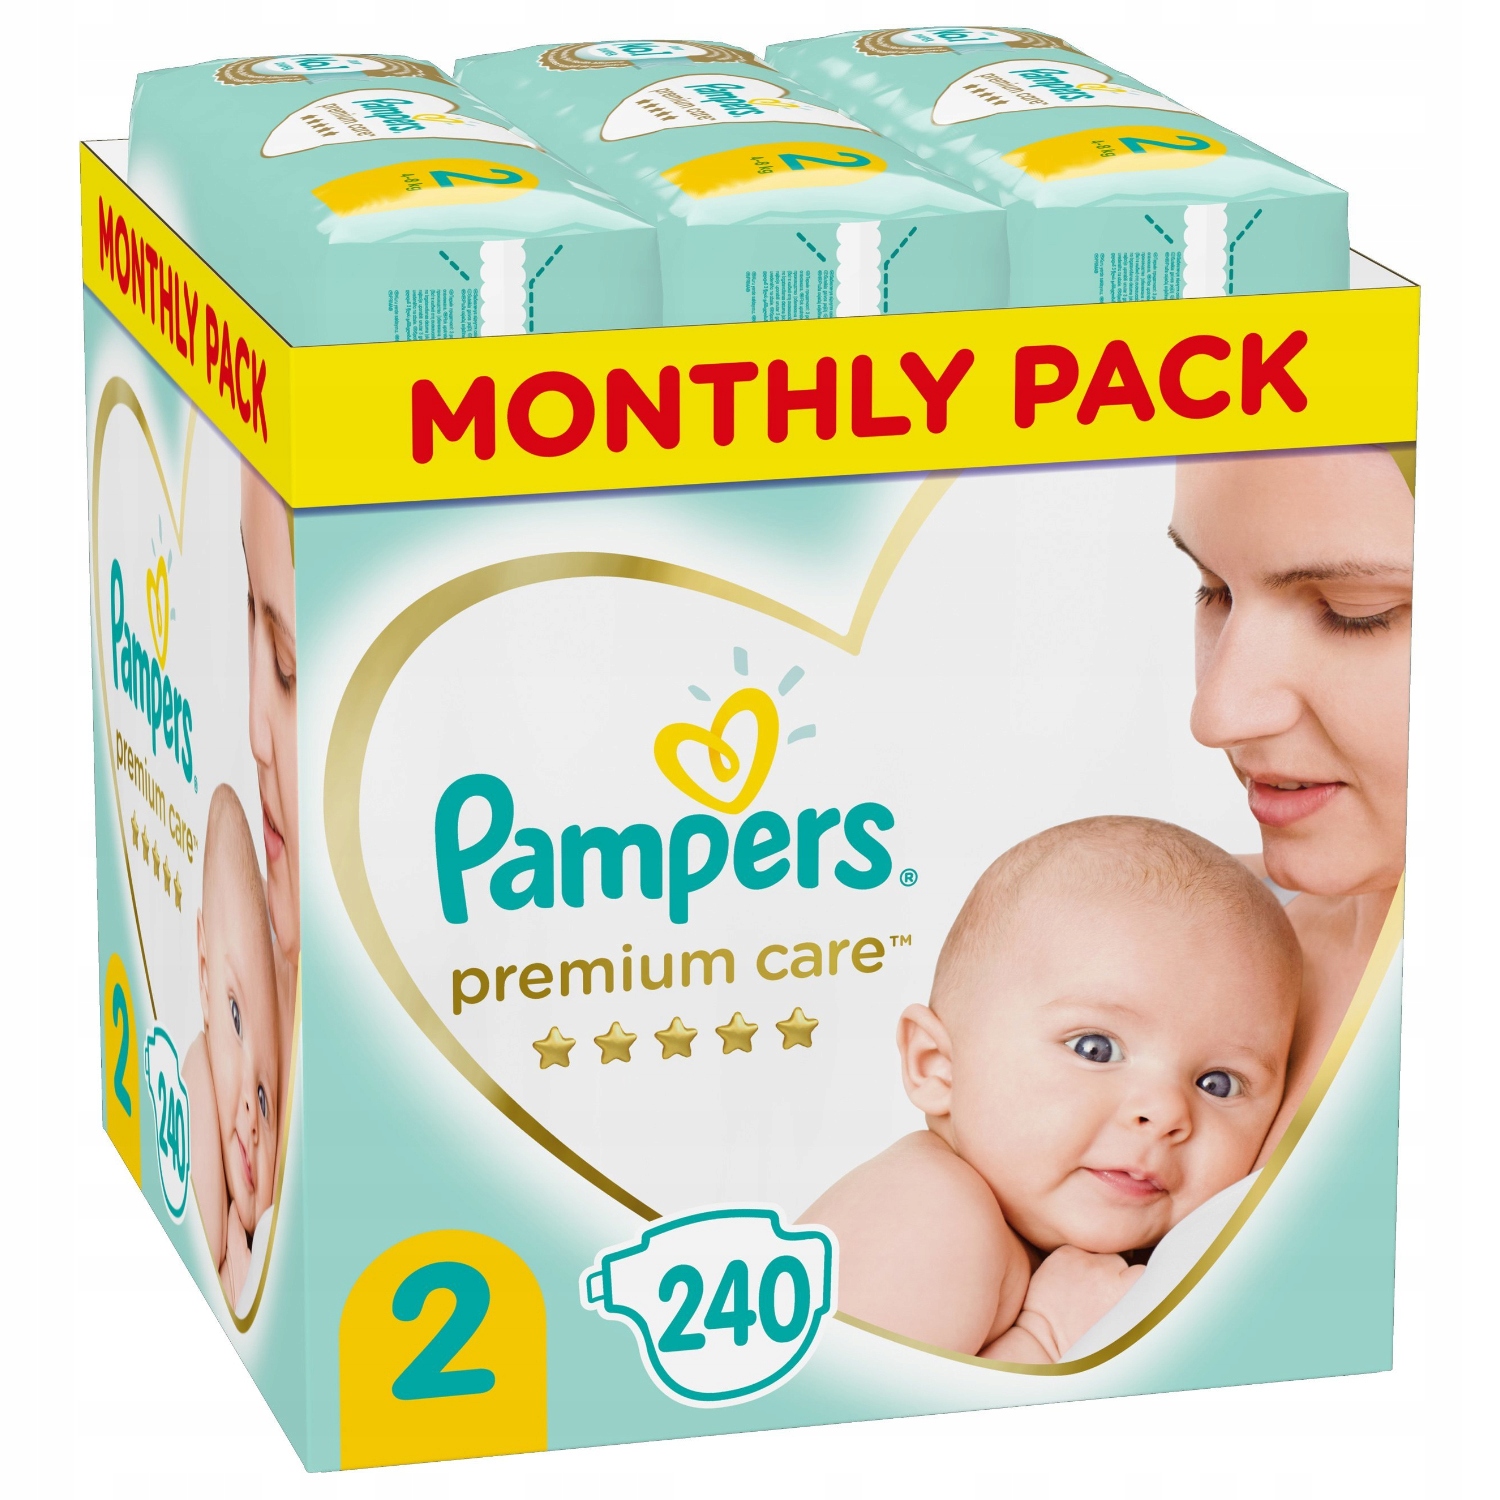 pampers rozmiary 8